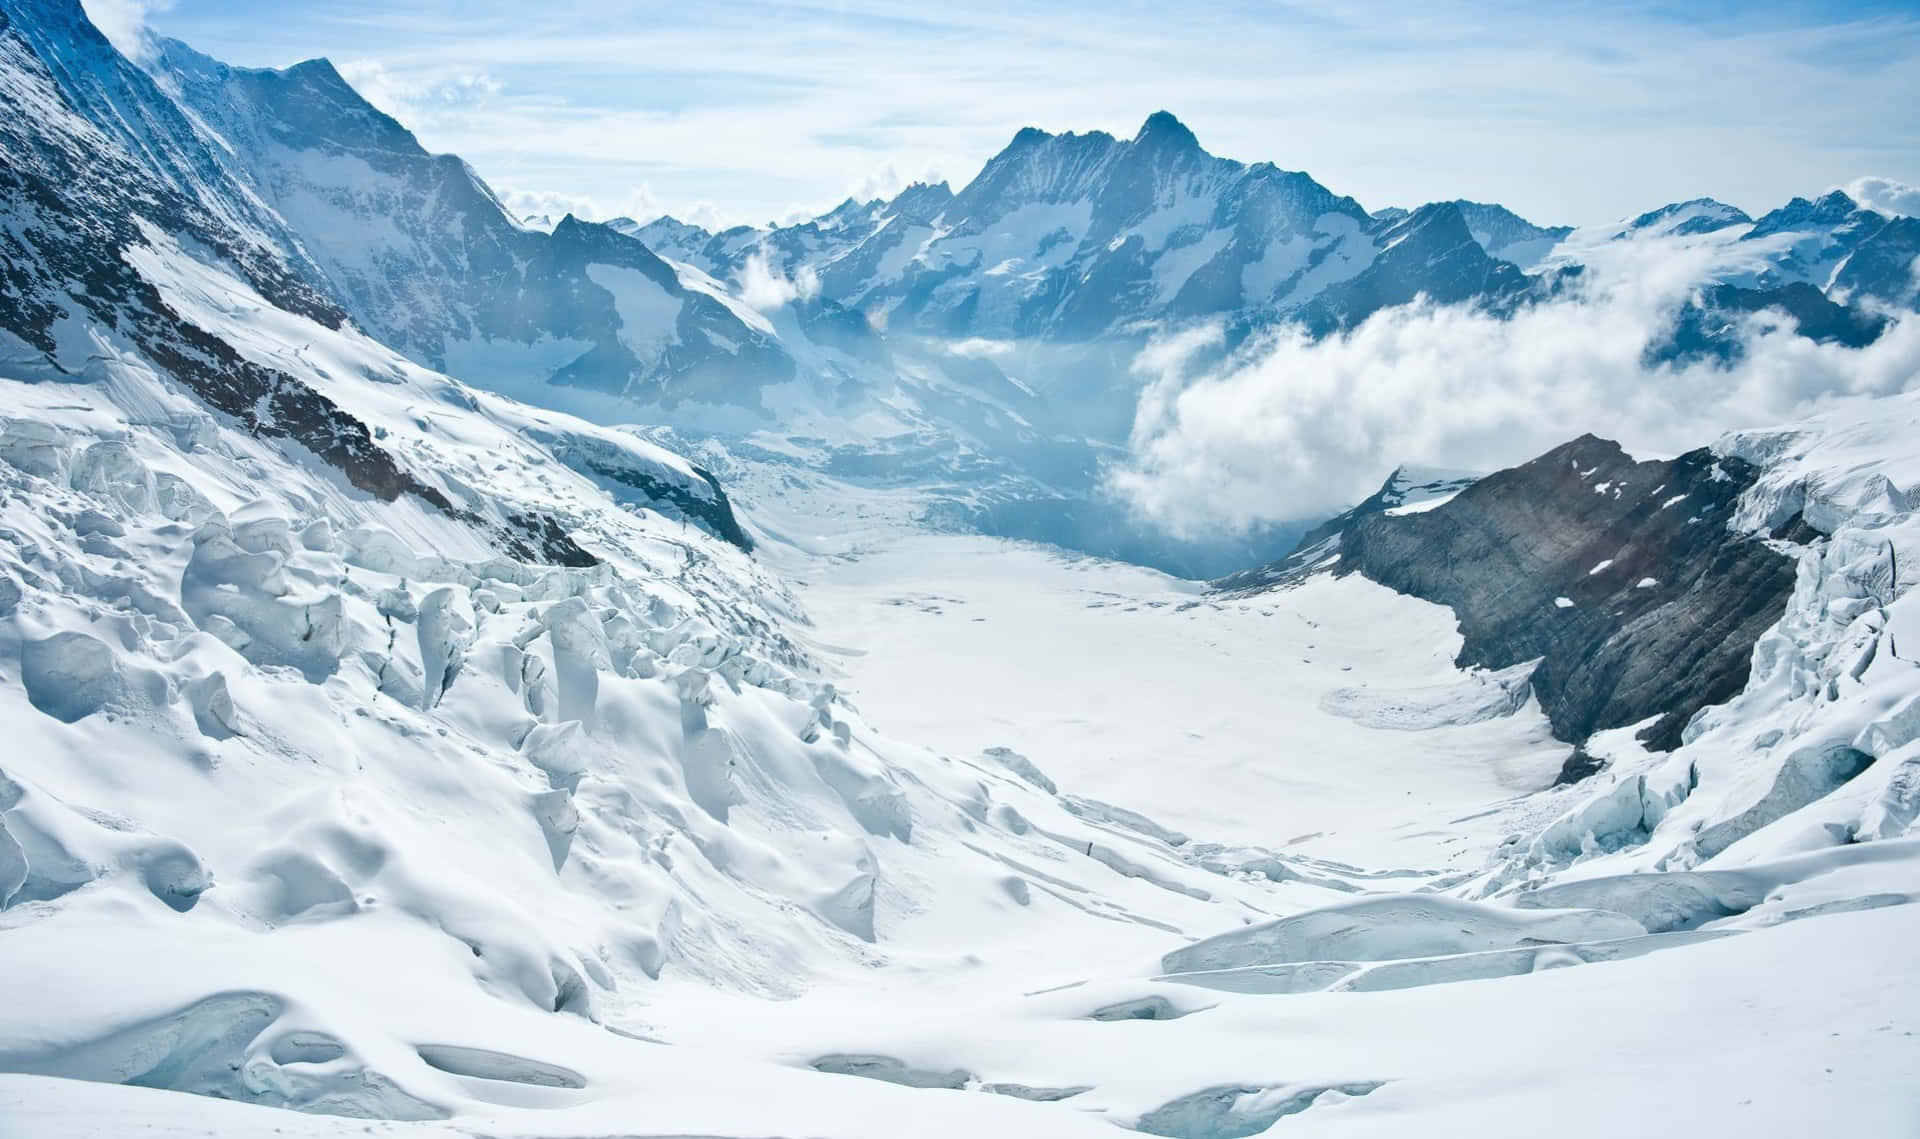 A Mountain Range With Snow Covered Mountains And Glaciers